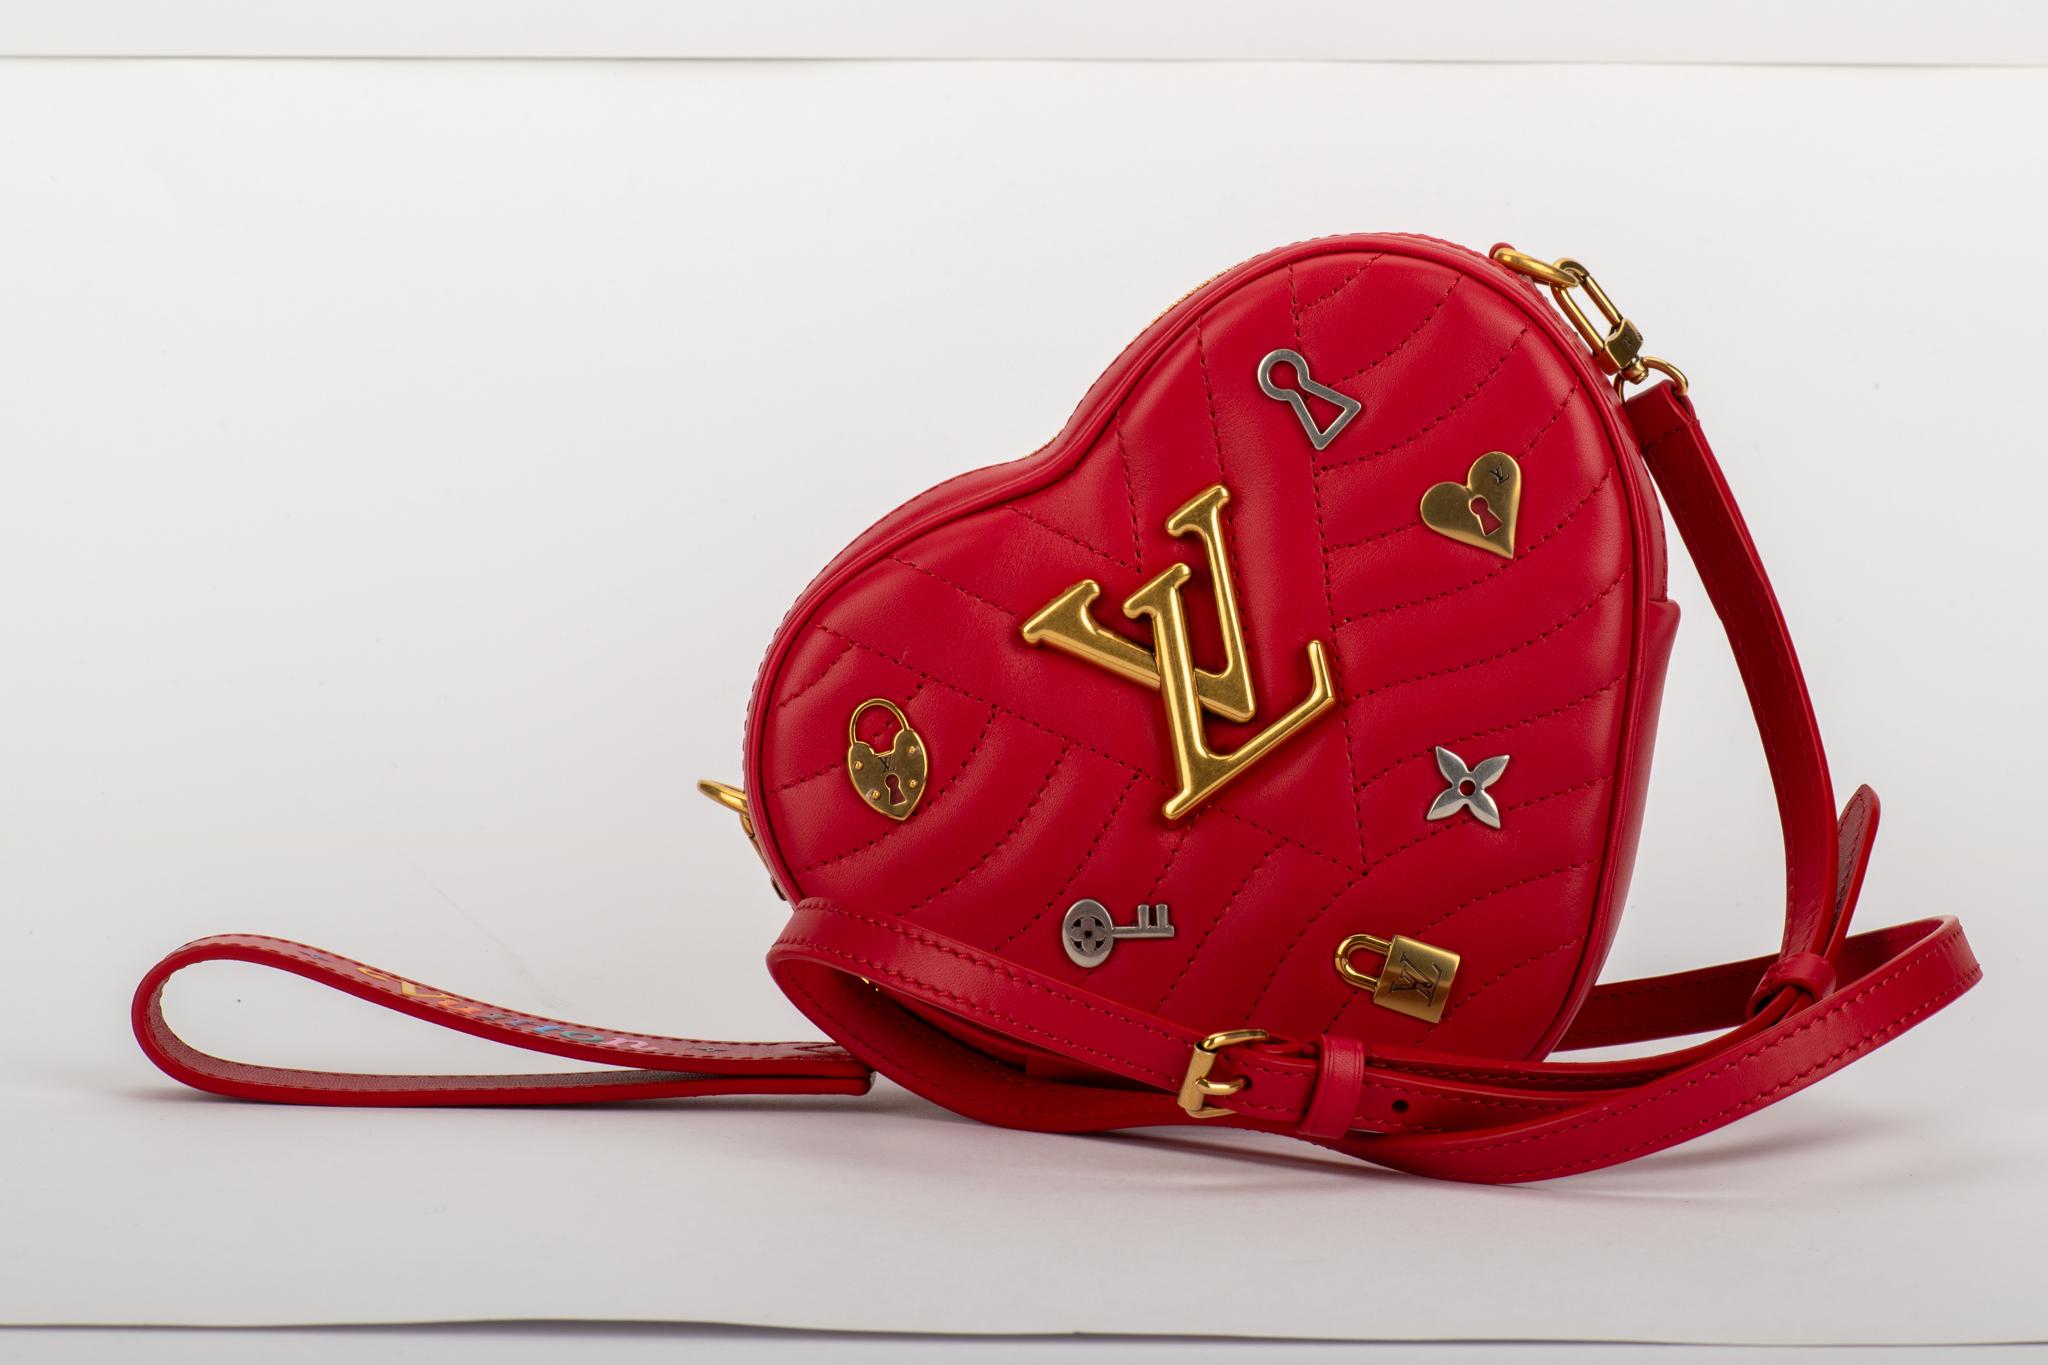 Women's New in Box Vuitton Limited Edition Red Heart Charm Handbag Clutch Belt Bag For Sale